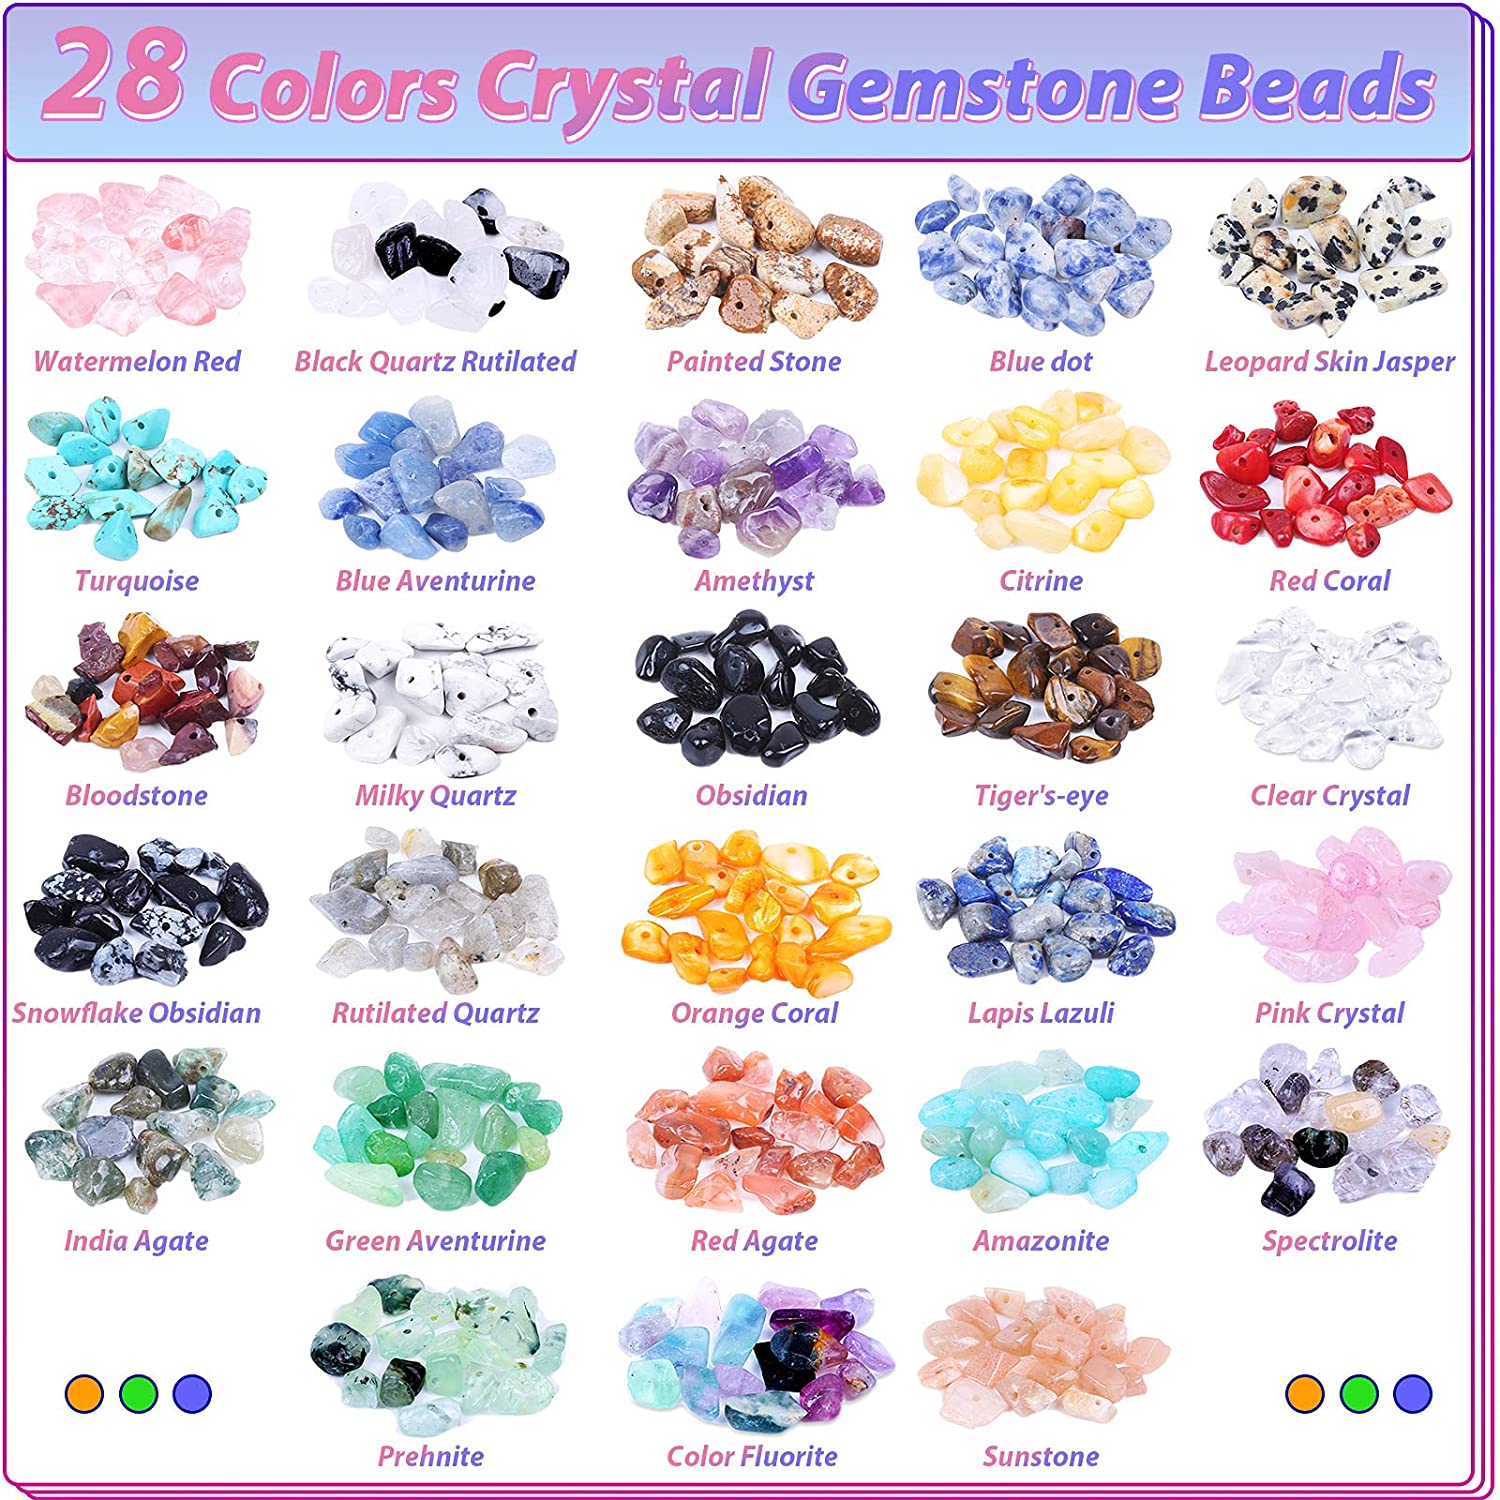 1400 Pcs Crystal Jewelry Making Kit,28 Colors Gemstone Beads For